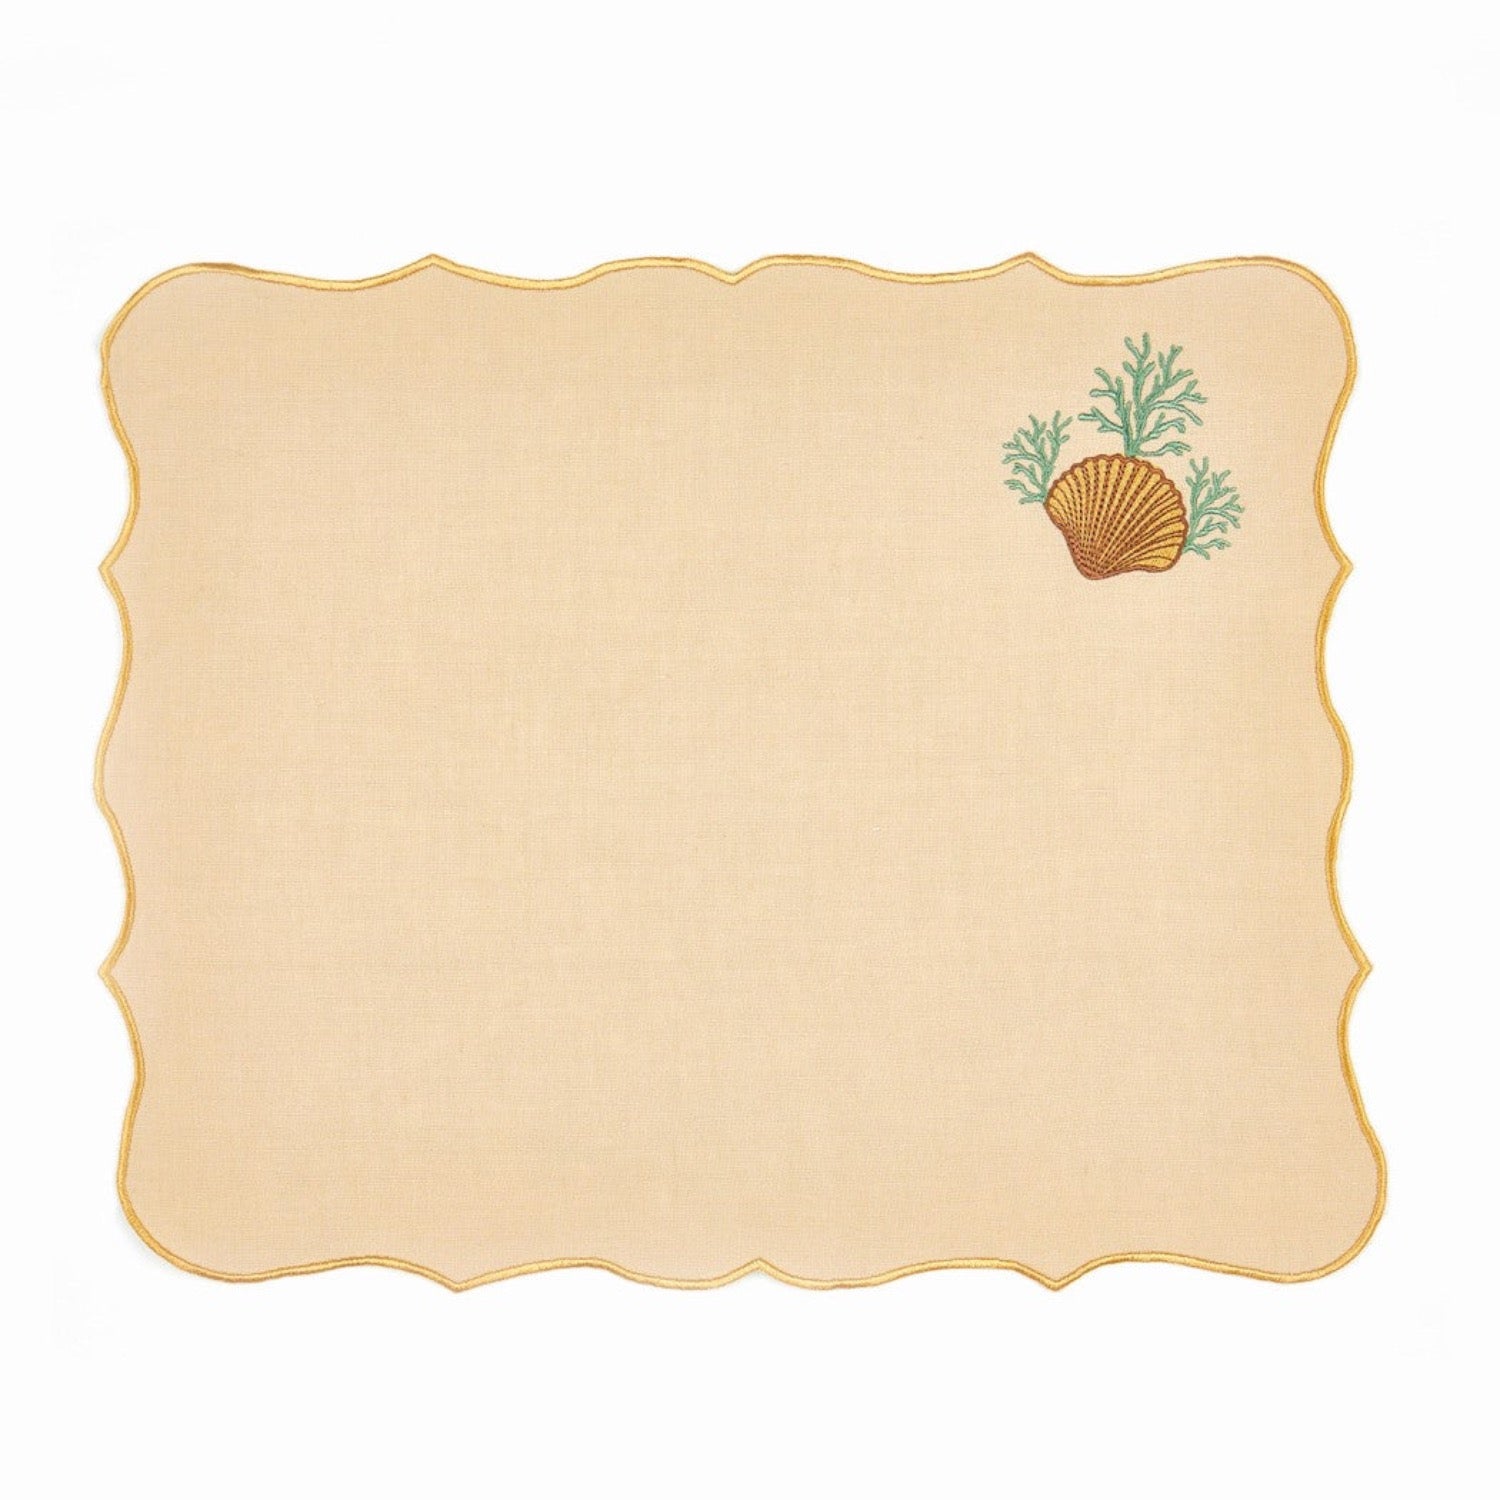 Seashell Embroidery Linen Placemats (Set of 2)